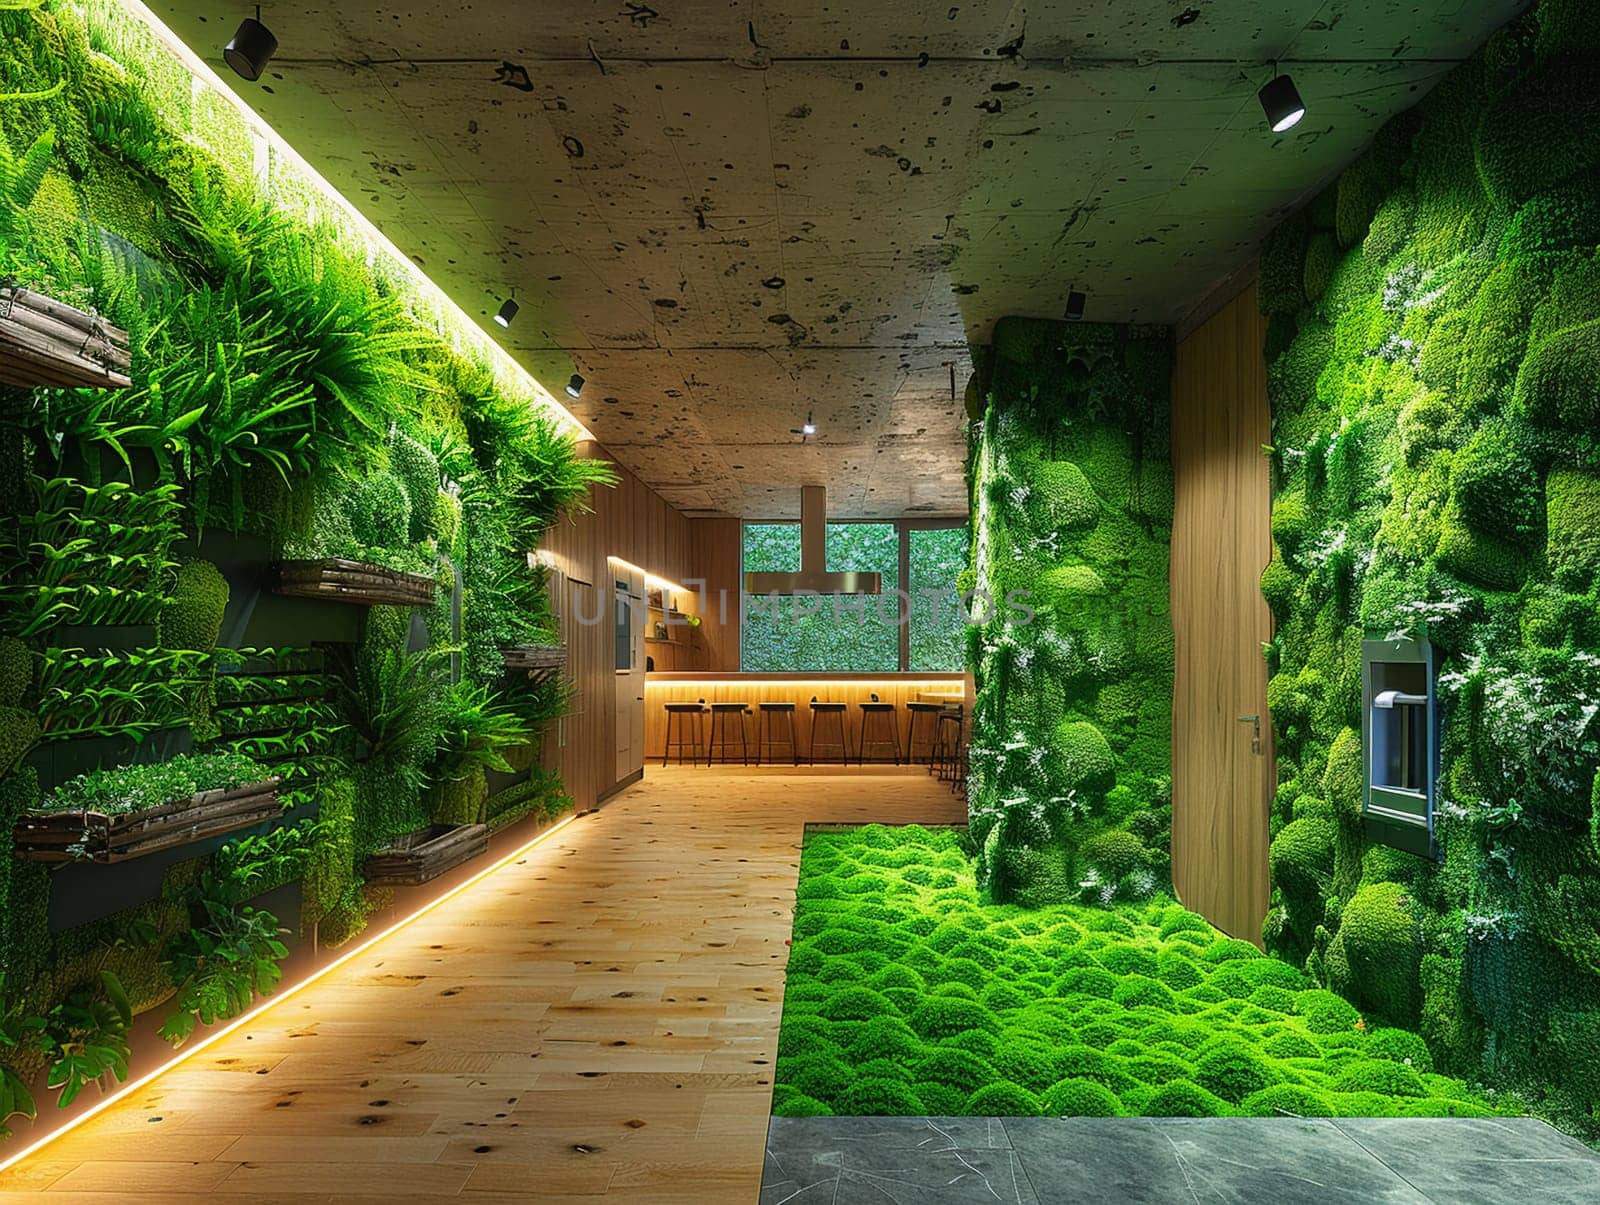 Sustainable home interior with recycled materials and green walls